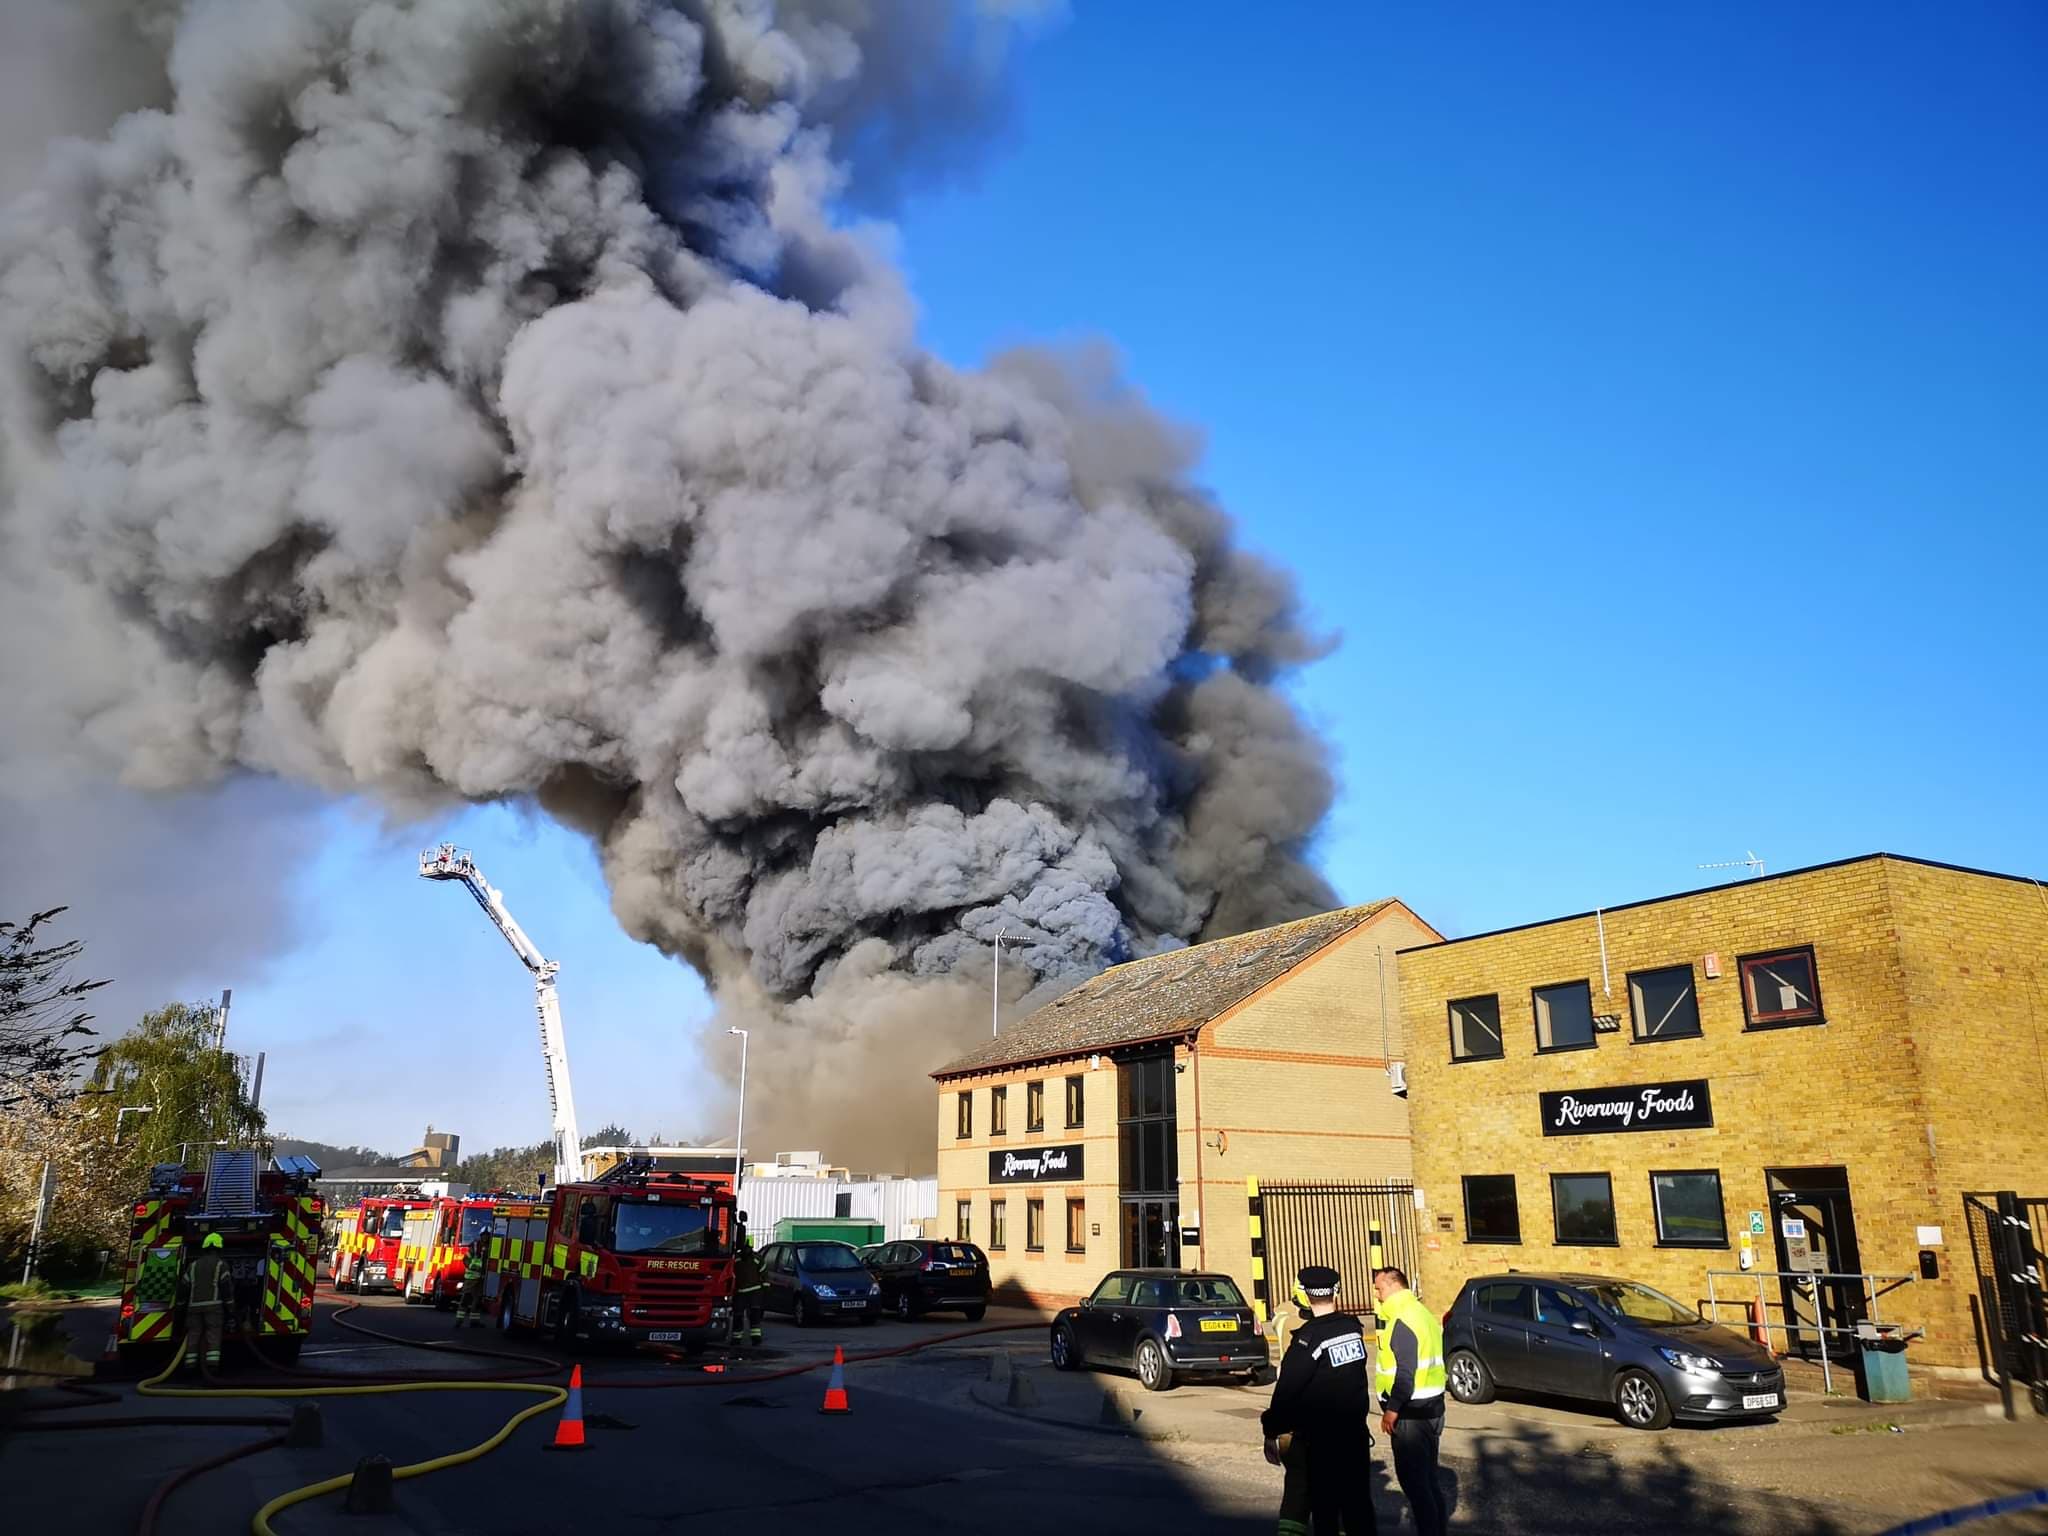 Firefighters were called to a fire in an industrial building on River Way, Harlow